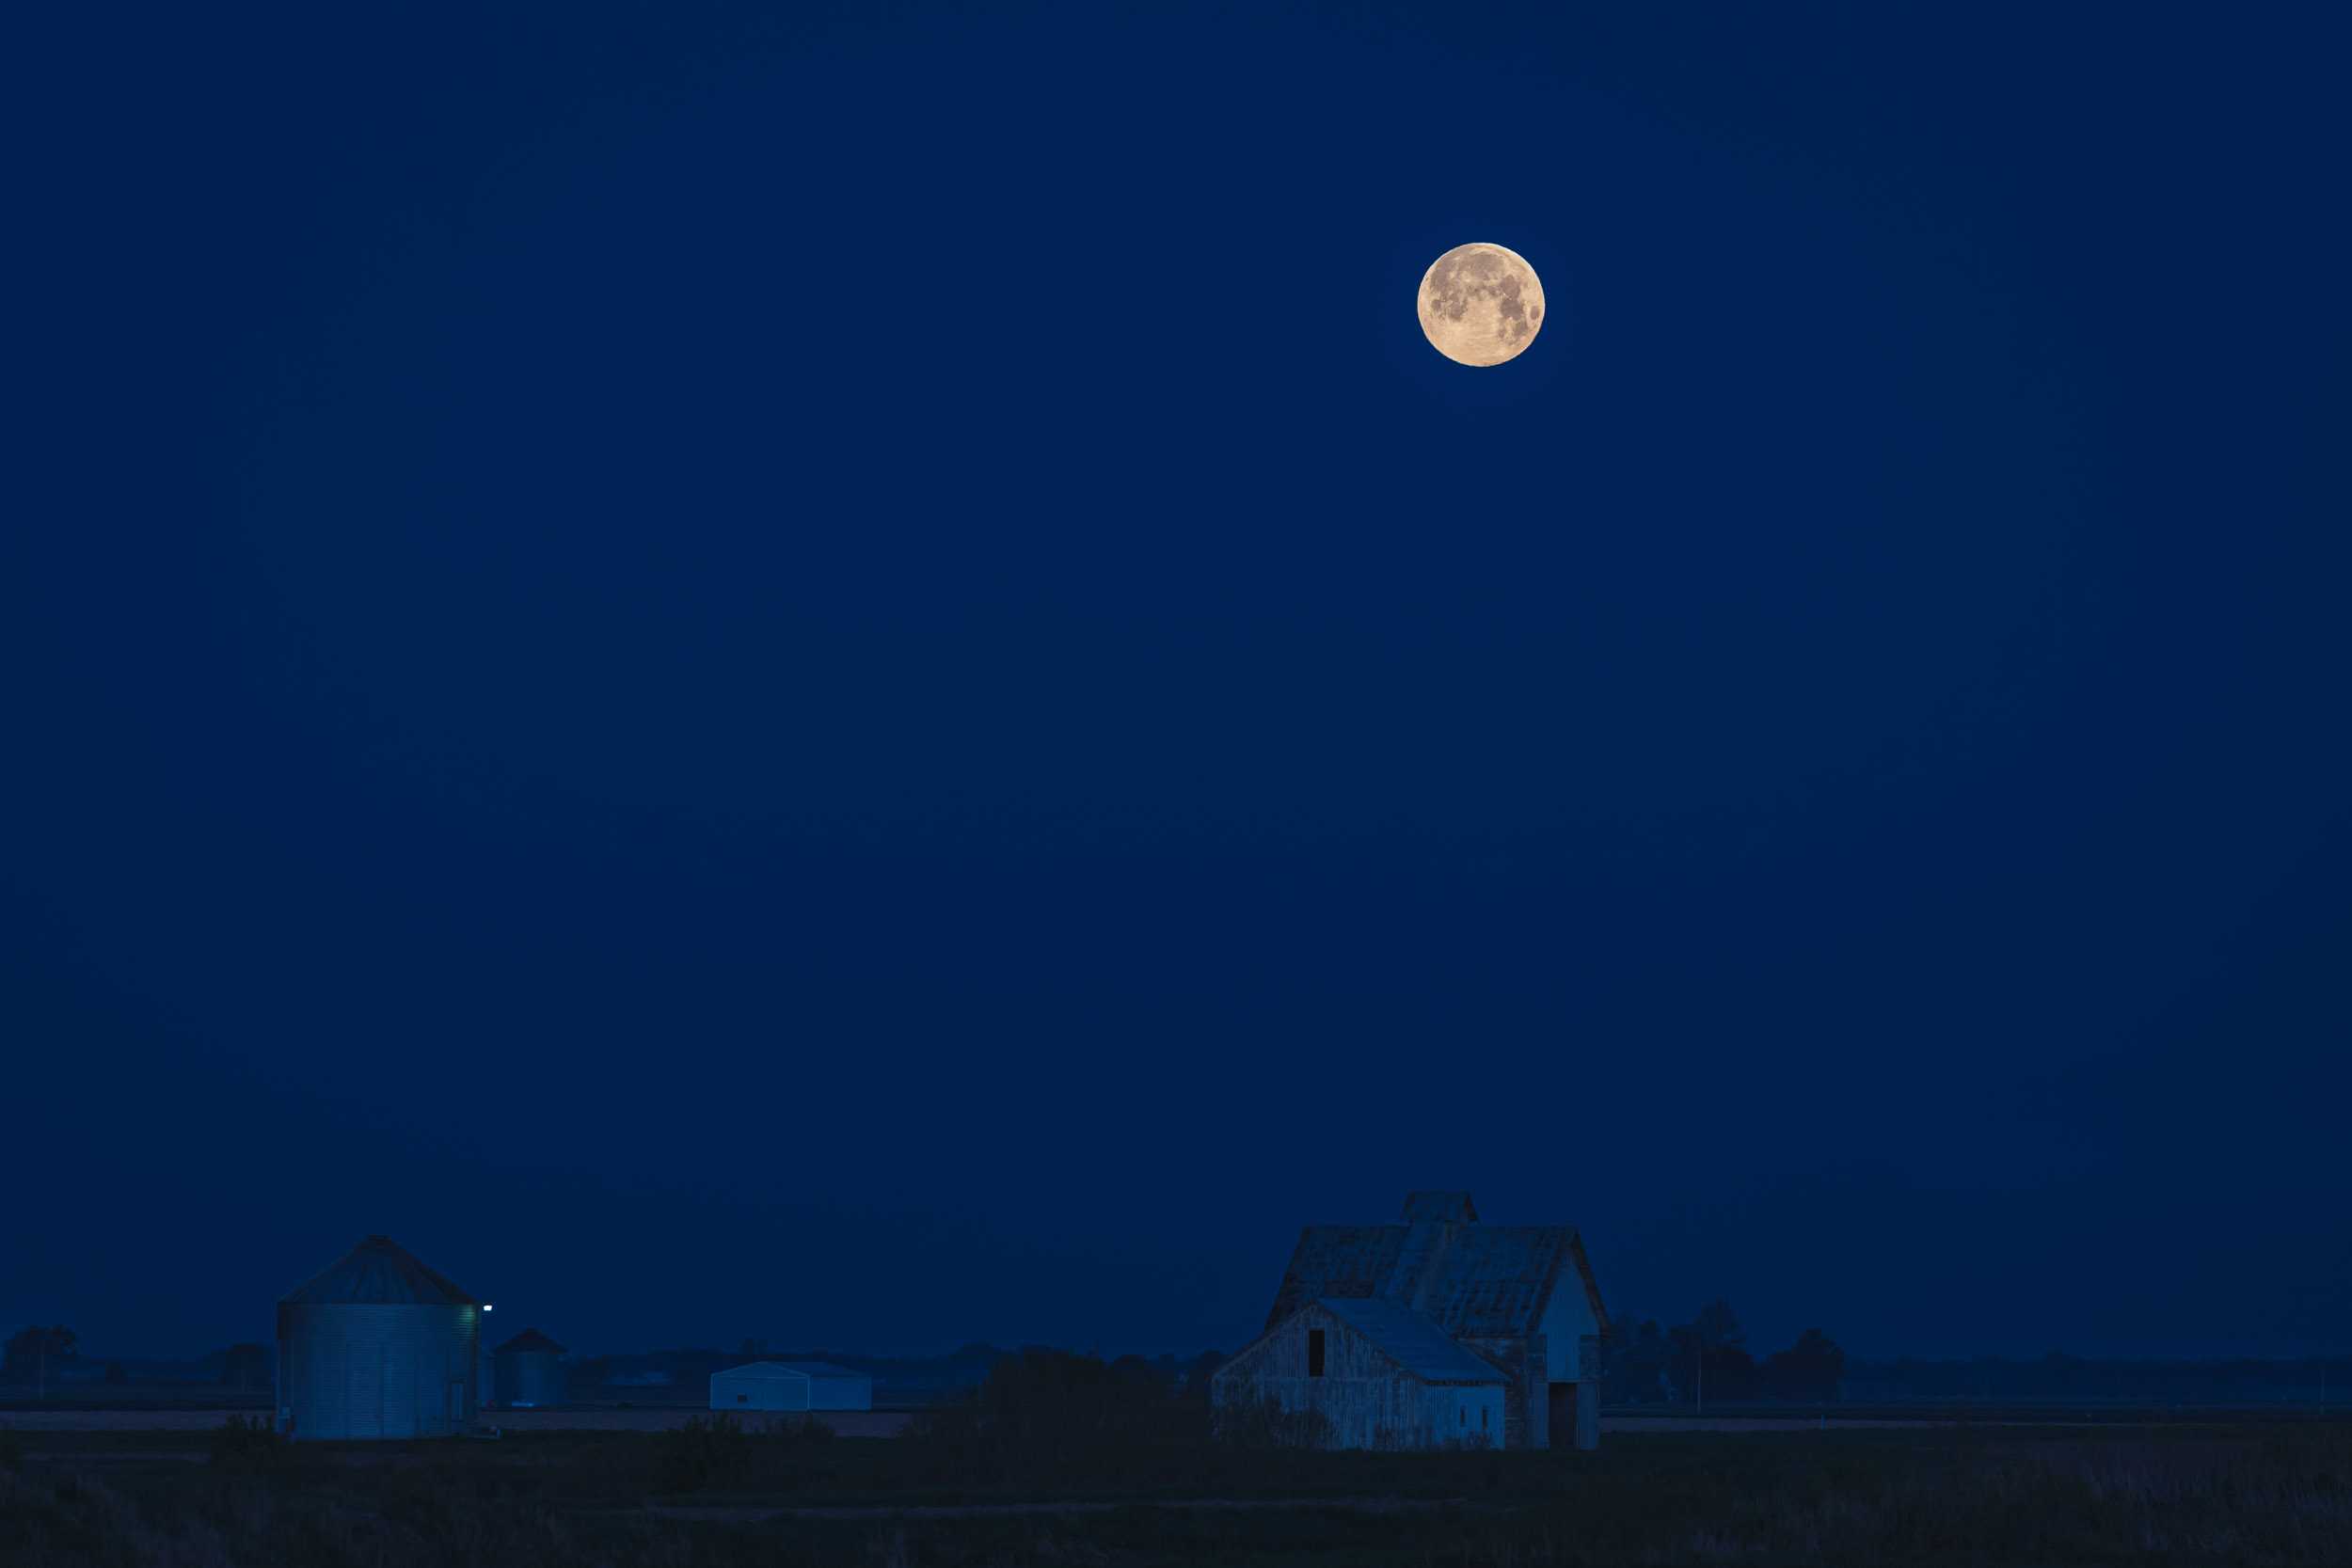 The bright, full moon provides a dull shine on a deep blue night revealing farm buildings in a field